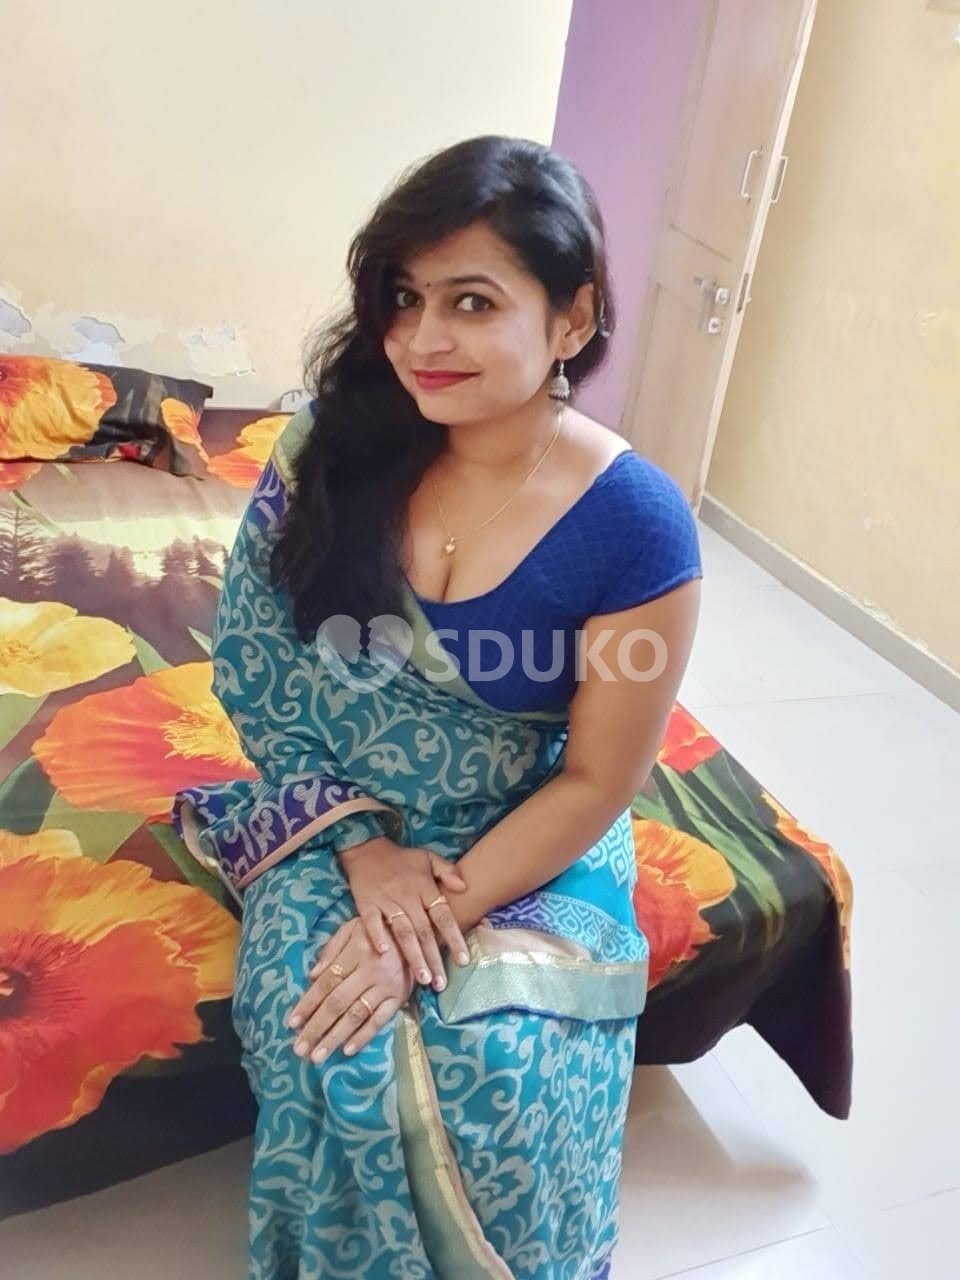 Bengalore LOW PRICE 100% SAFE AND SECURE GENUINE CALL GIRL AFFORDABLE PRICE CALL... ..